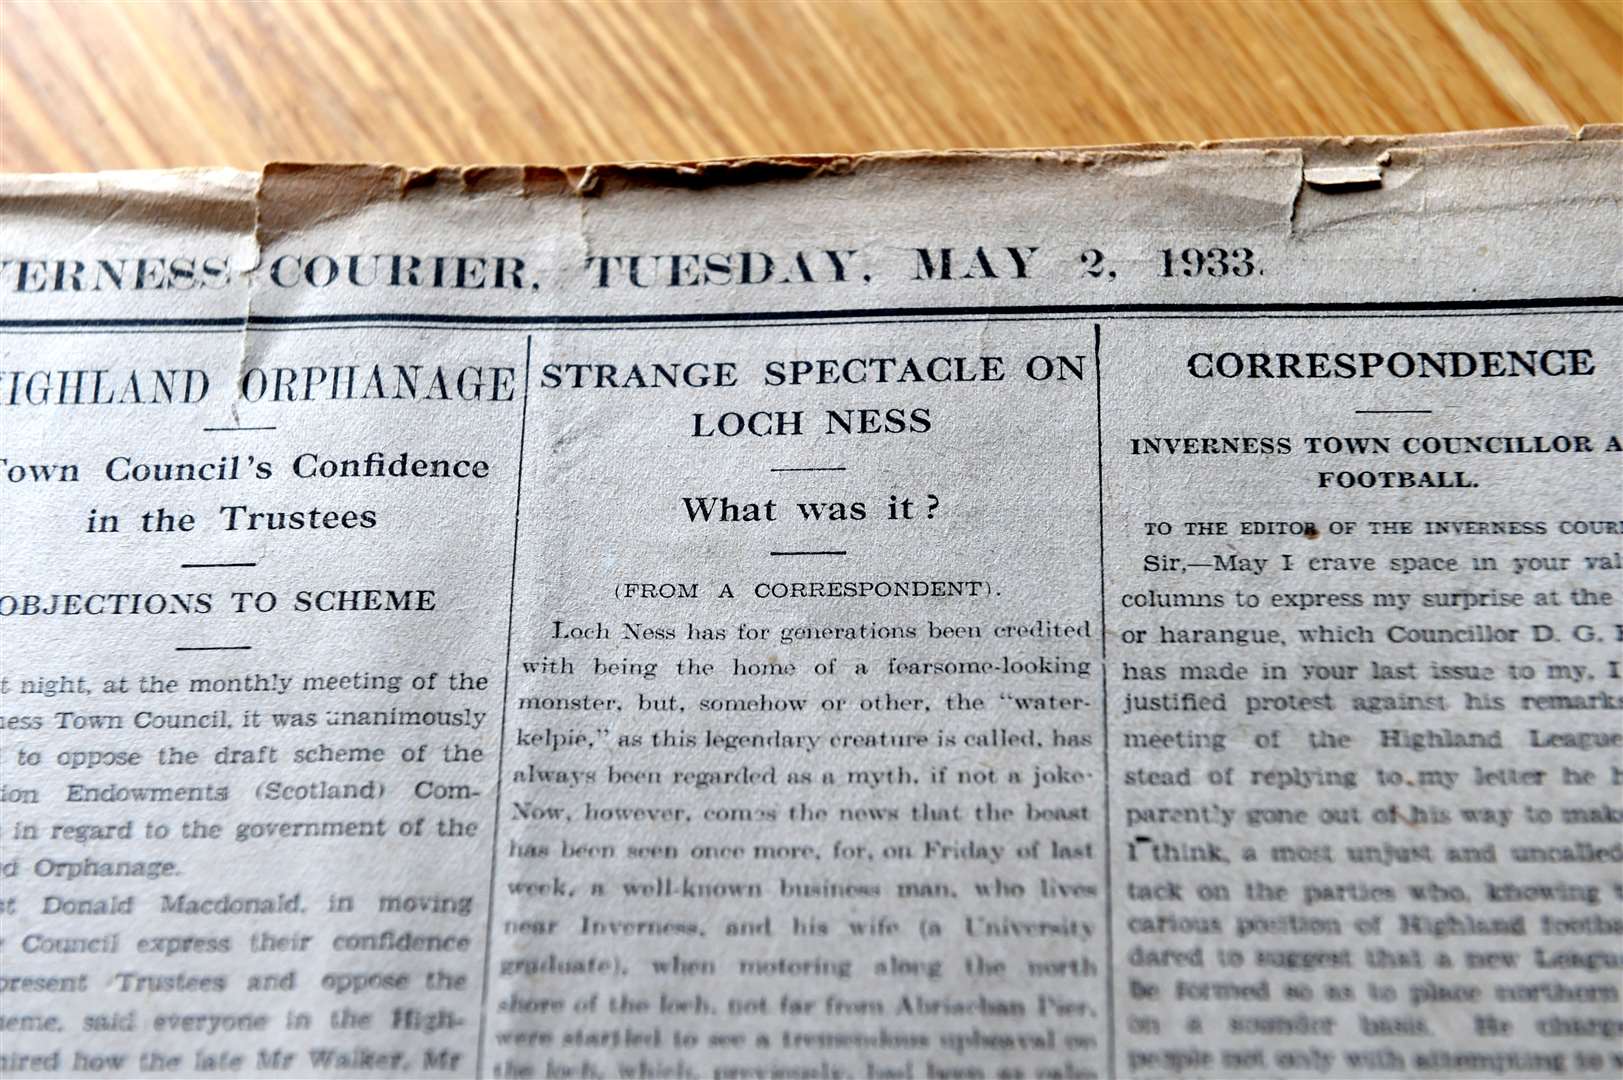 The Inverness Courier reported on a possible sighting of Nessie back in 1933.